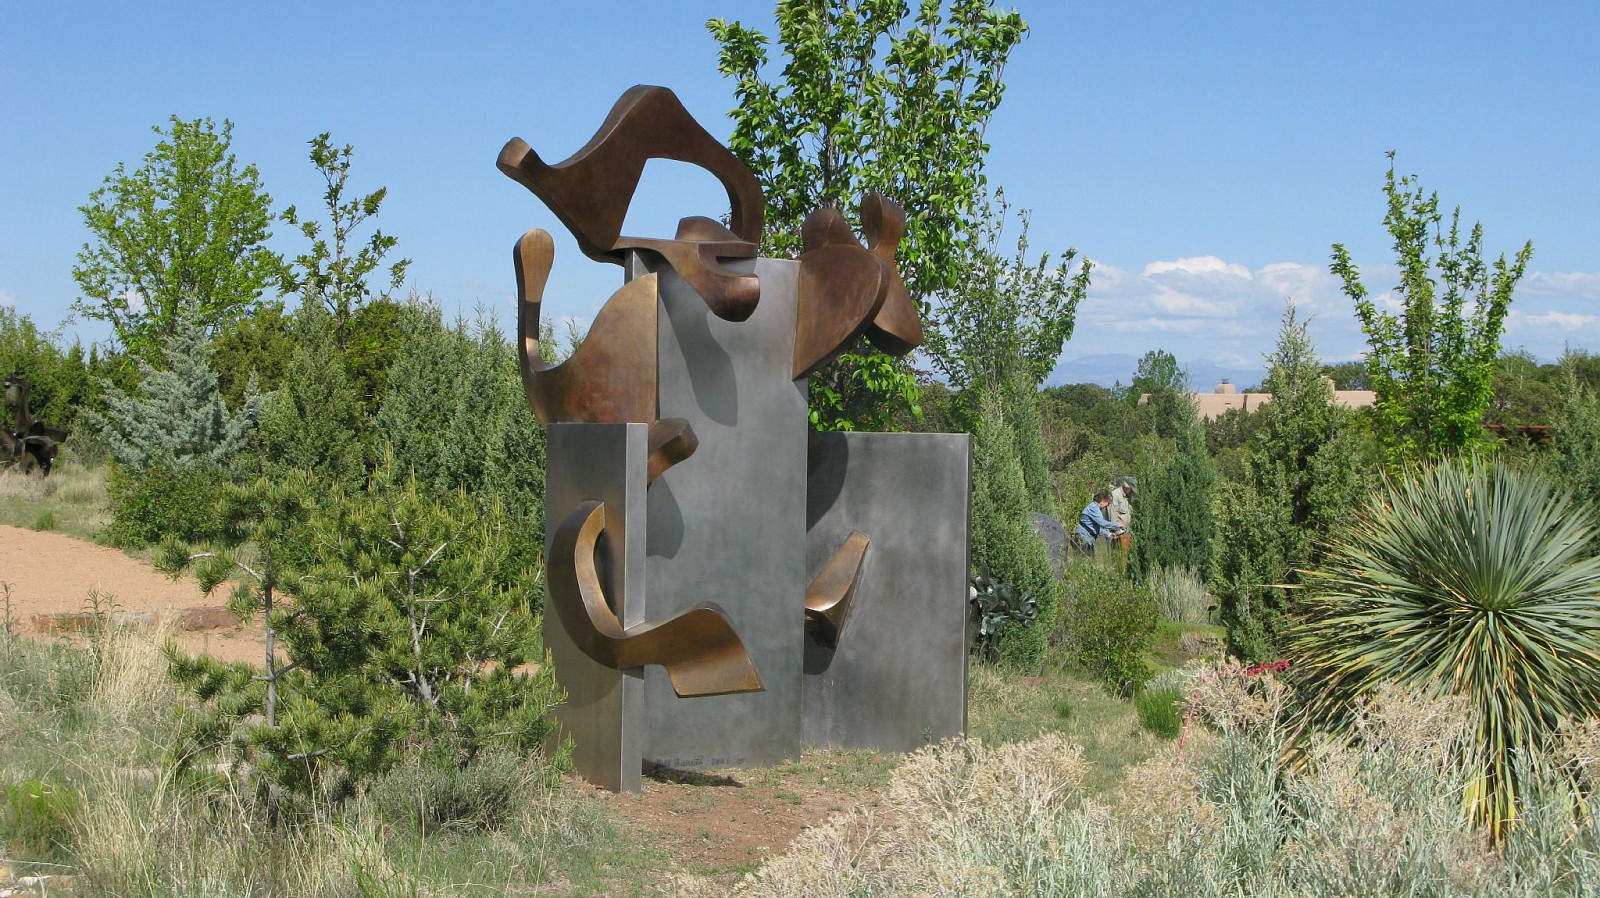 Bill Barrett, Z Lexicon II
Fabricated Bronze and Stainless Steel
BARR00033